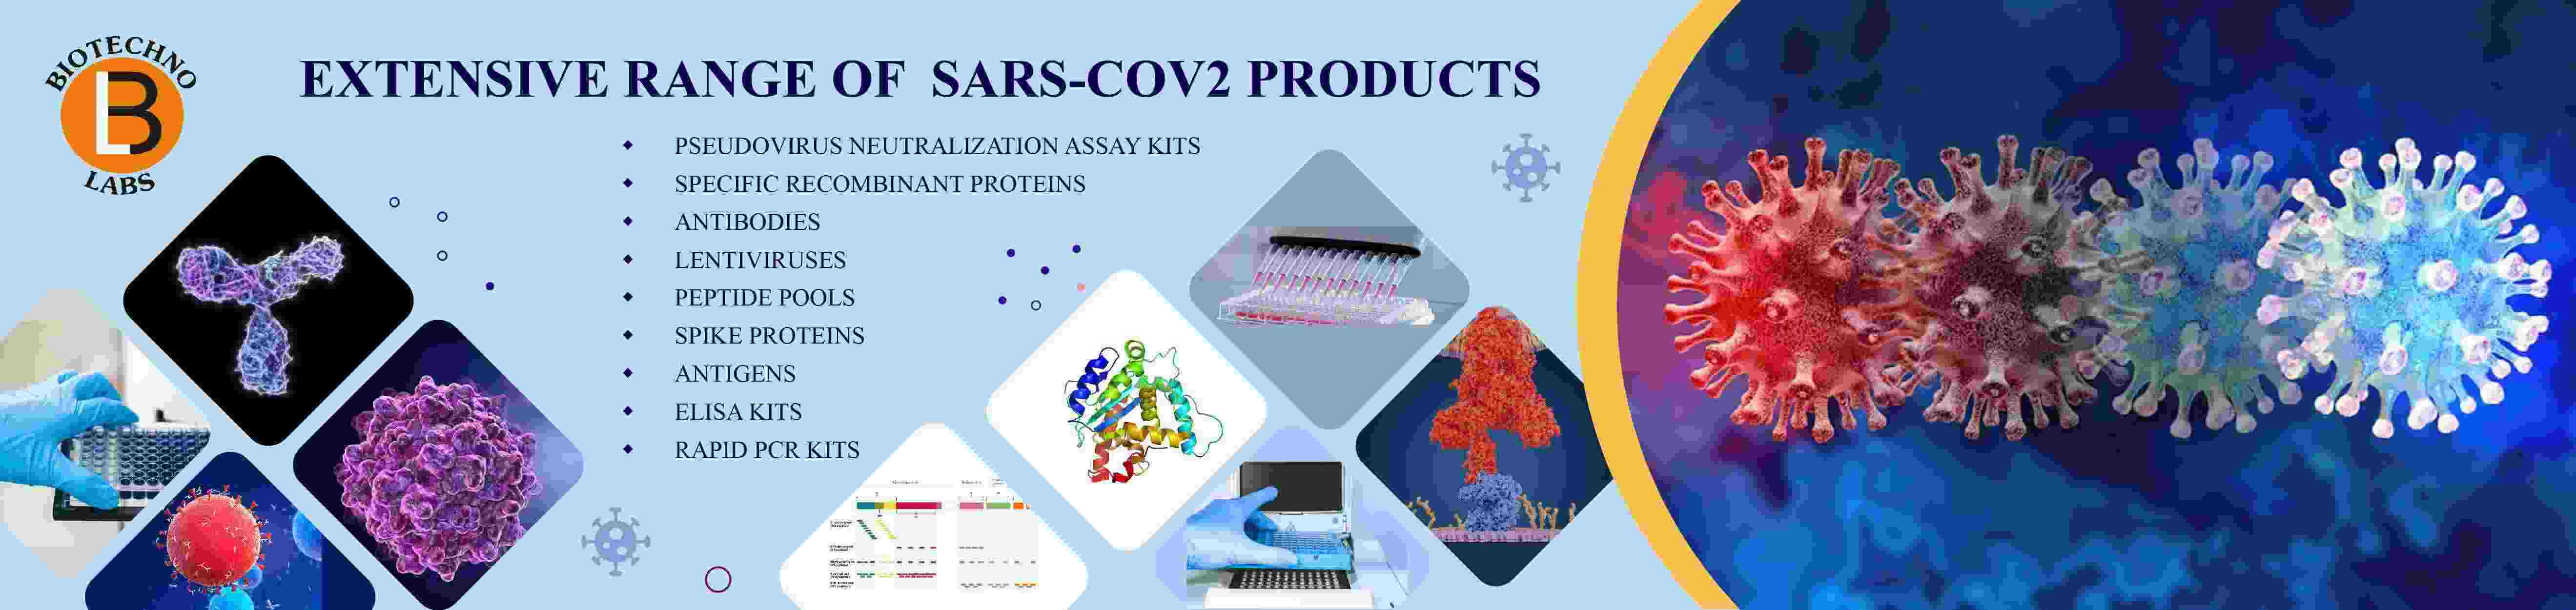 Extensive Range of Sars COV 2 Products